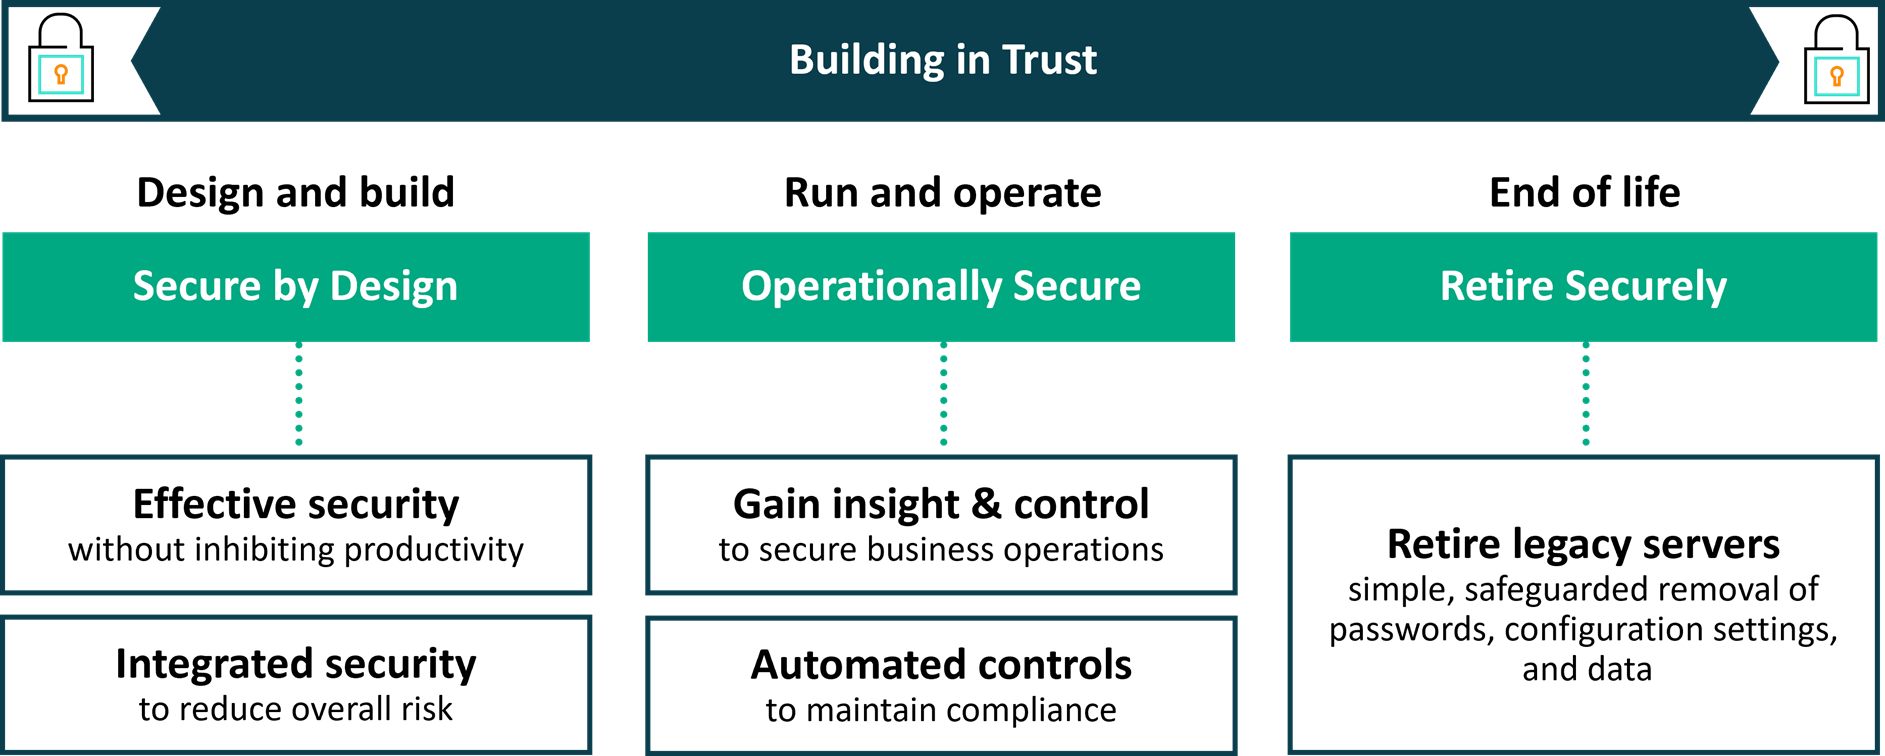 Building in trust.png